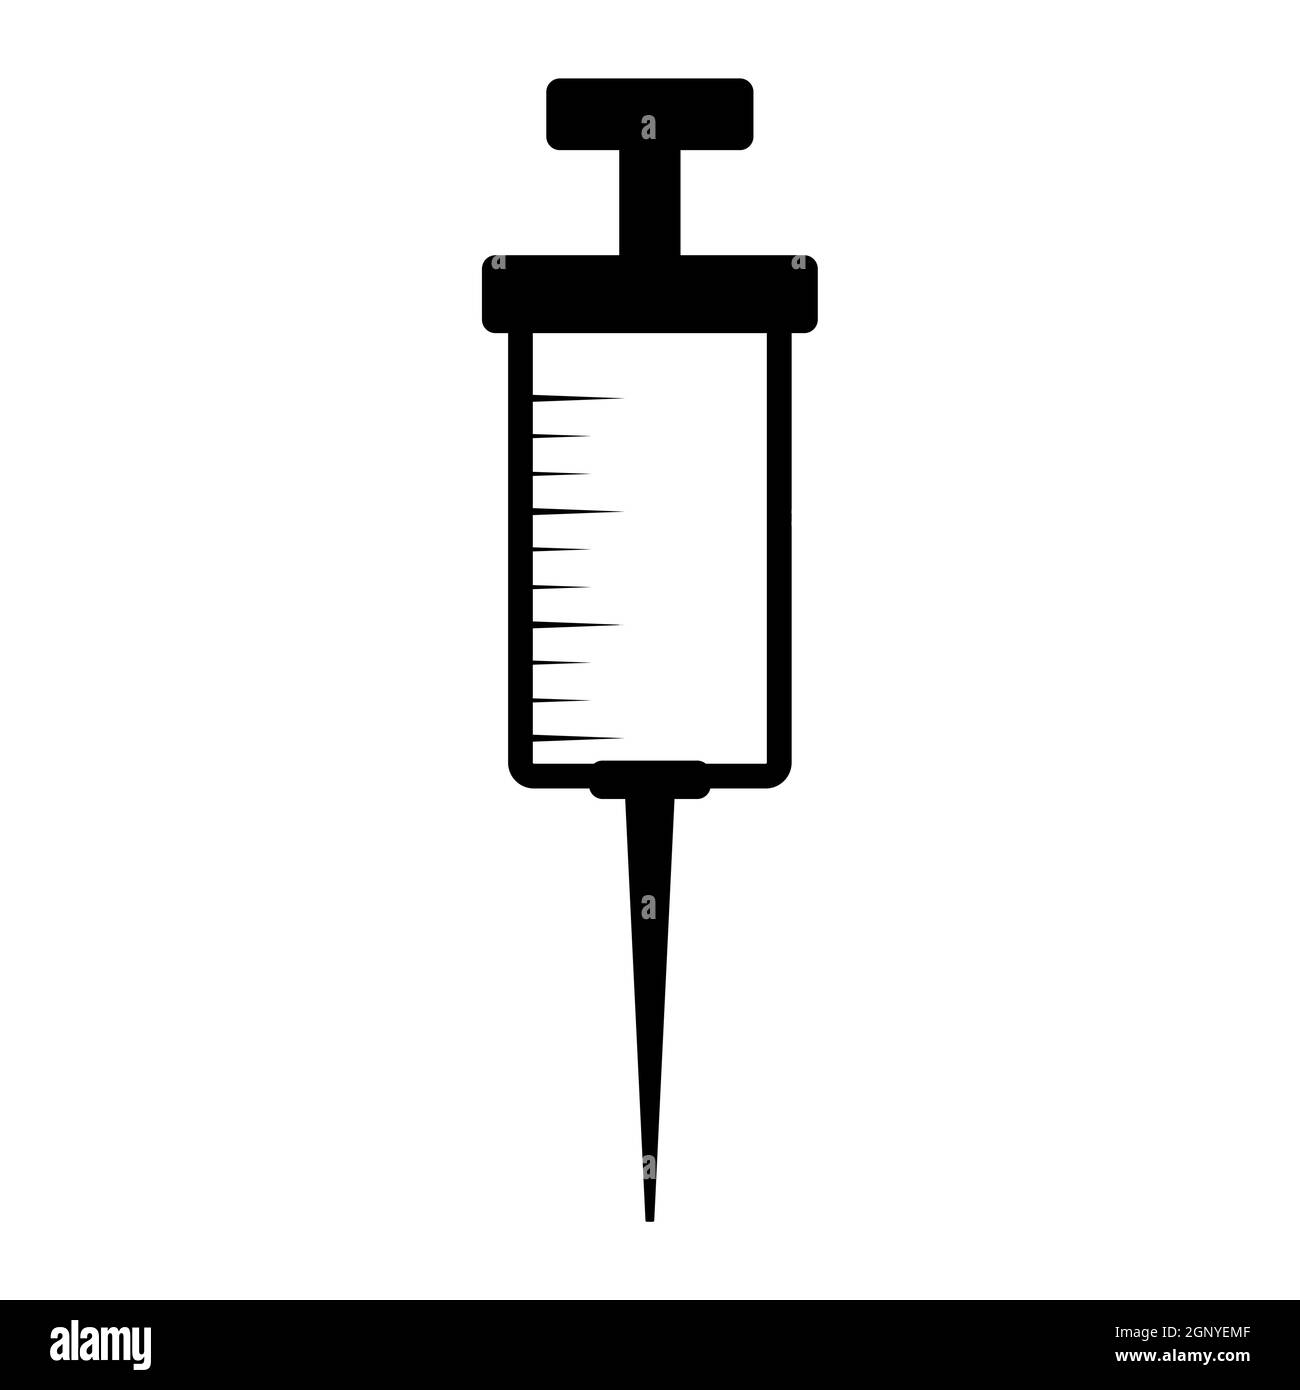 Syringe silhouette icon. Black shape of medical injection or vaccine symbol. Great for coronavirus vaccinate design. Vector illustration isolated on white background. Stock Vector